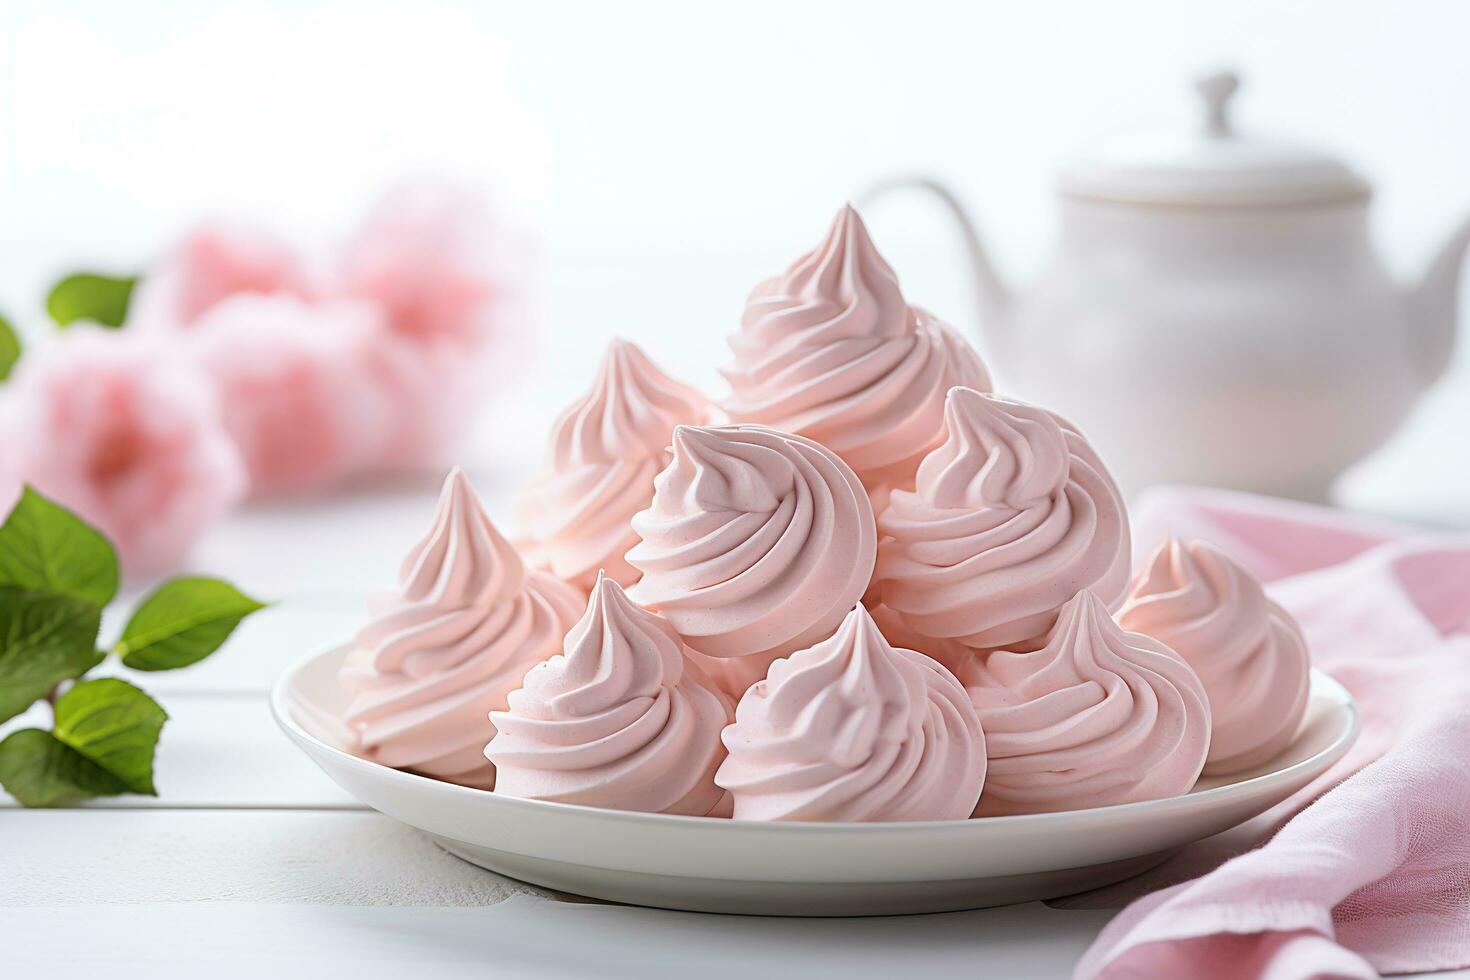 Small pink meringues in a white dish. Candy bar photo